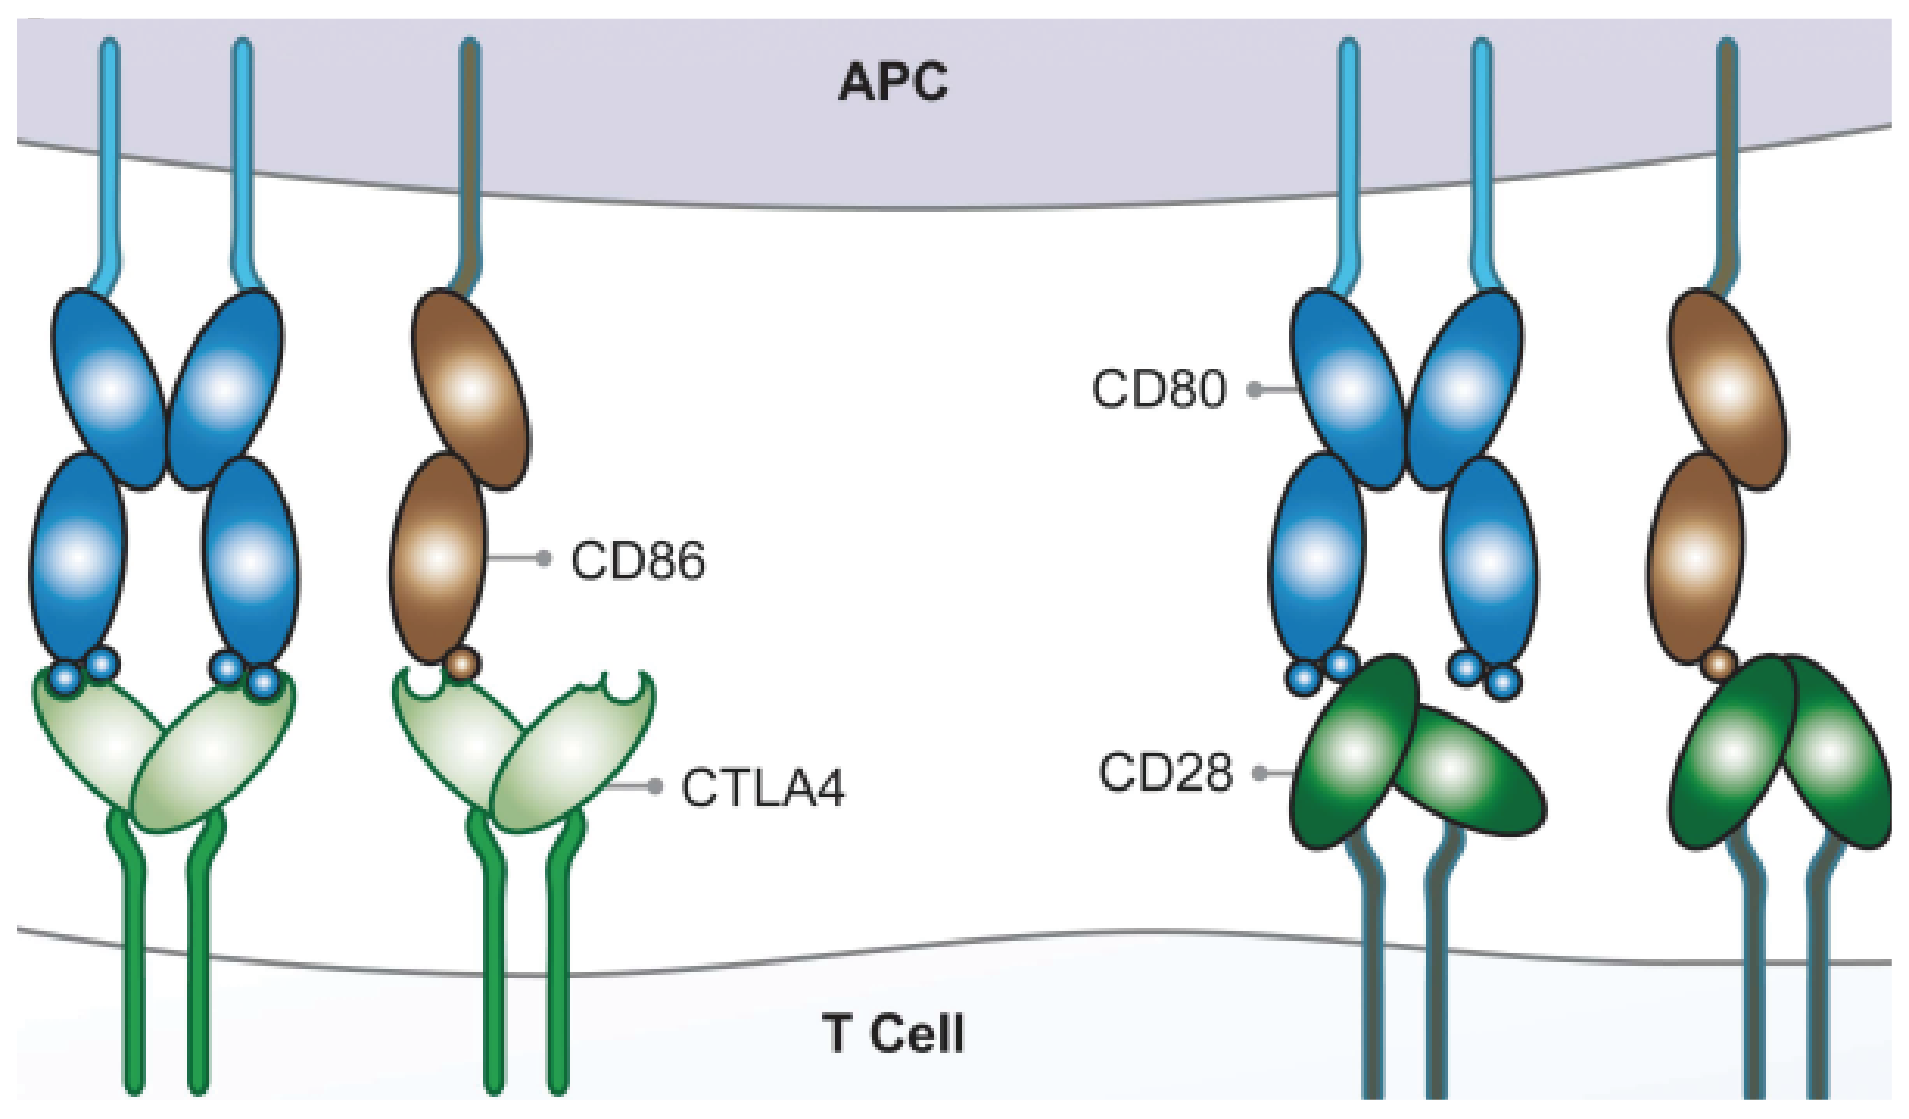 Immune Checkpoint Proteins